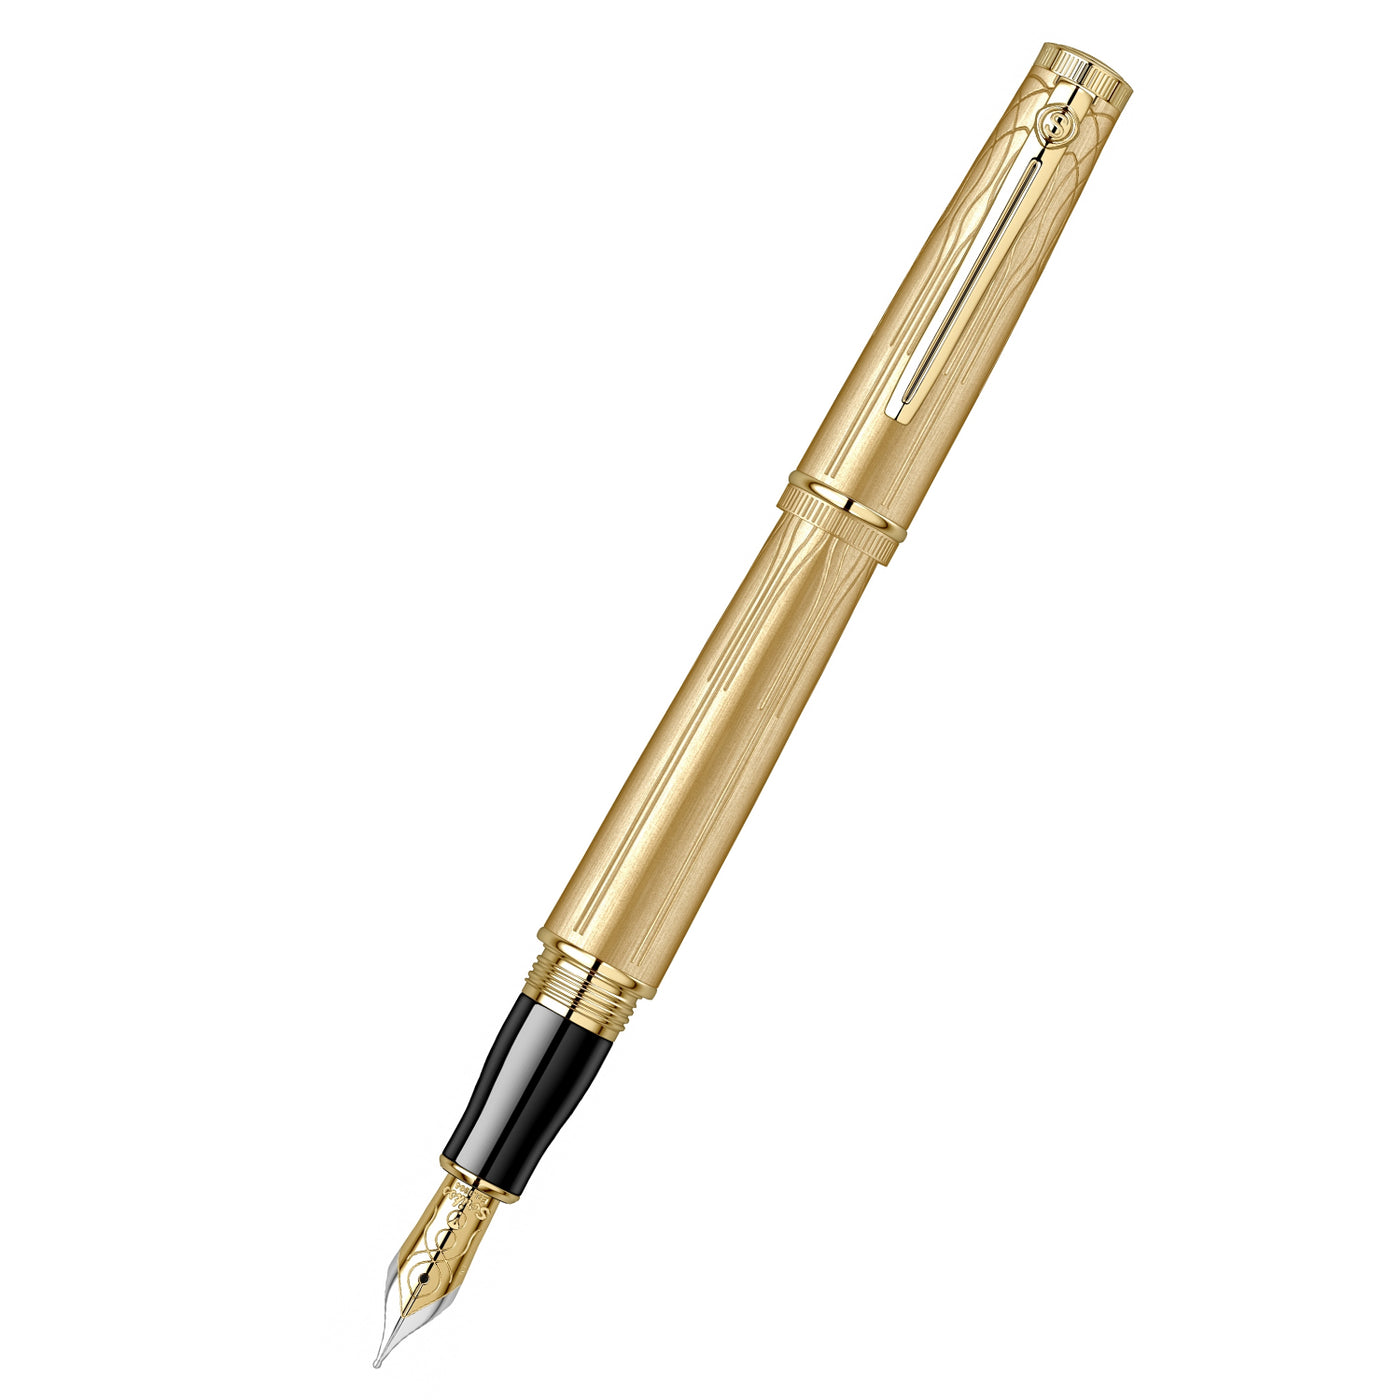 Scrikss | Heritage | Fountain Pen | Gold-Broad